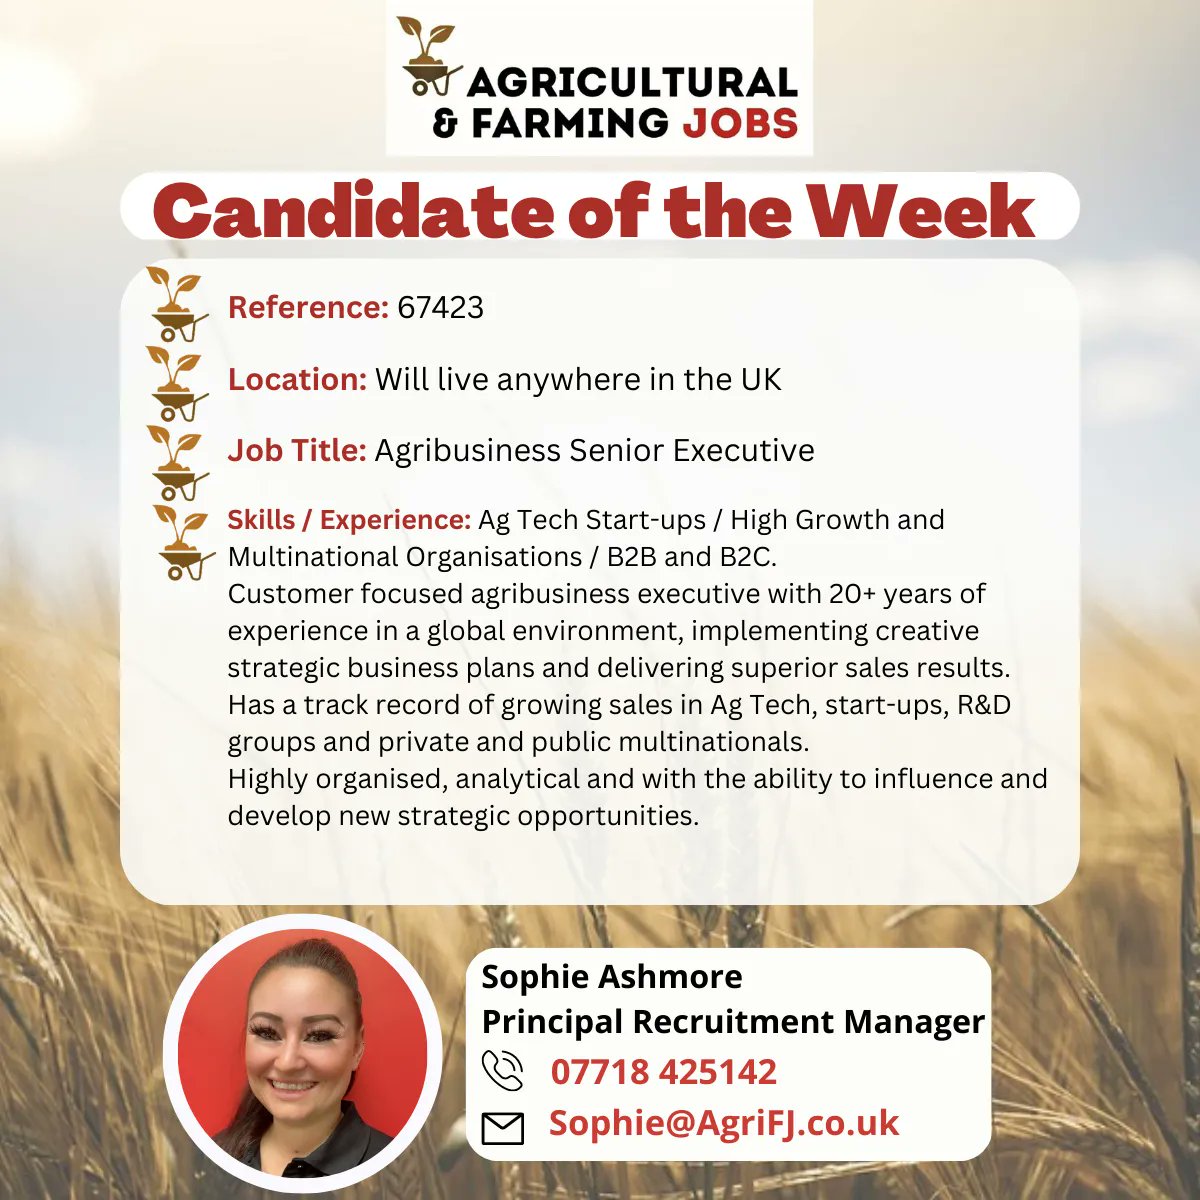 🌟***Candidate of the Week***🌟

If you would like to find out more about this candidate, please contact Sophie on 📞 07718 425142 or email ✉ Sophie@AgriFJ.co.uk

#agrifj #agriculturalandfarmingjobs #candidate #candidateoftheweek #agribusiness #seniorexecutive #agtech